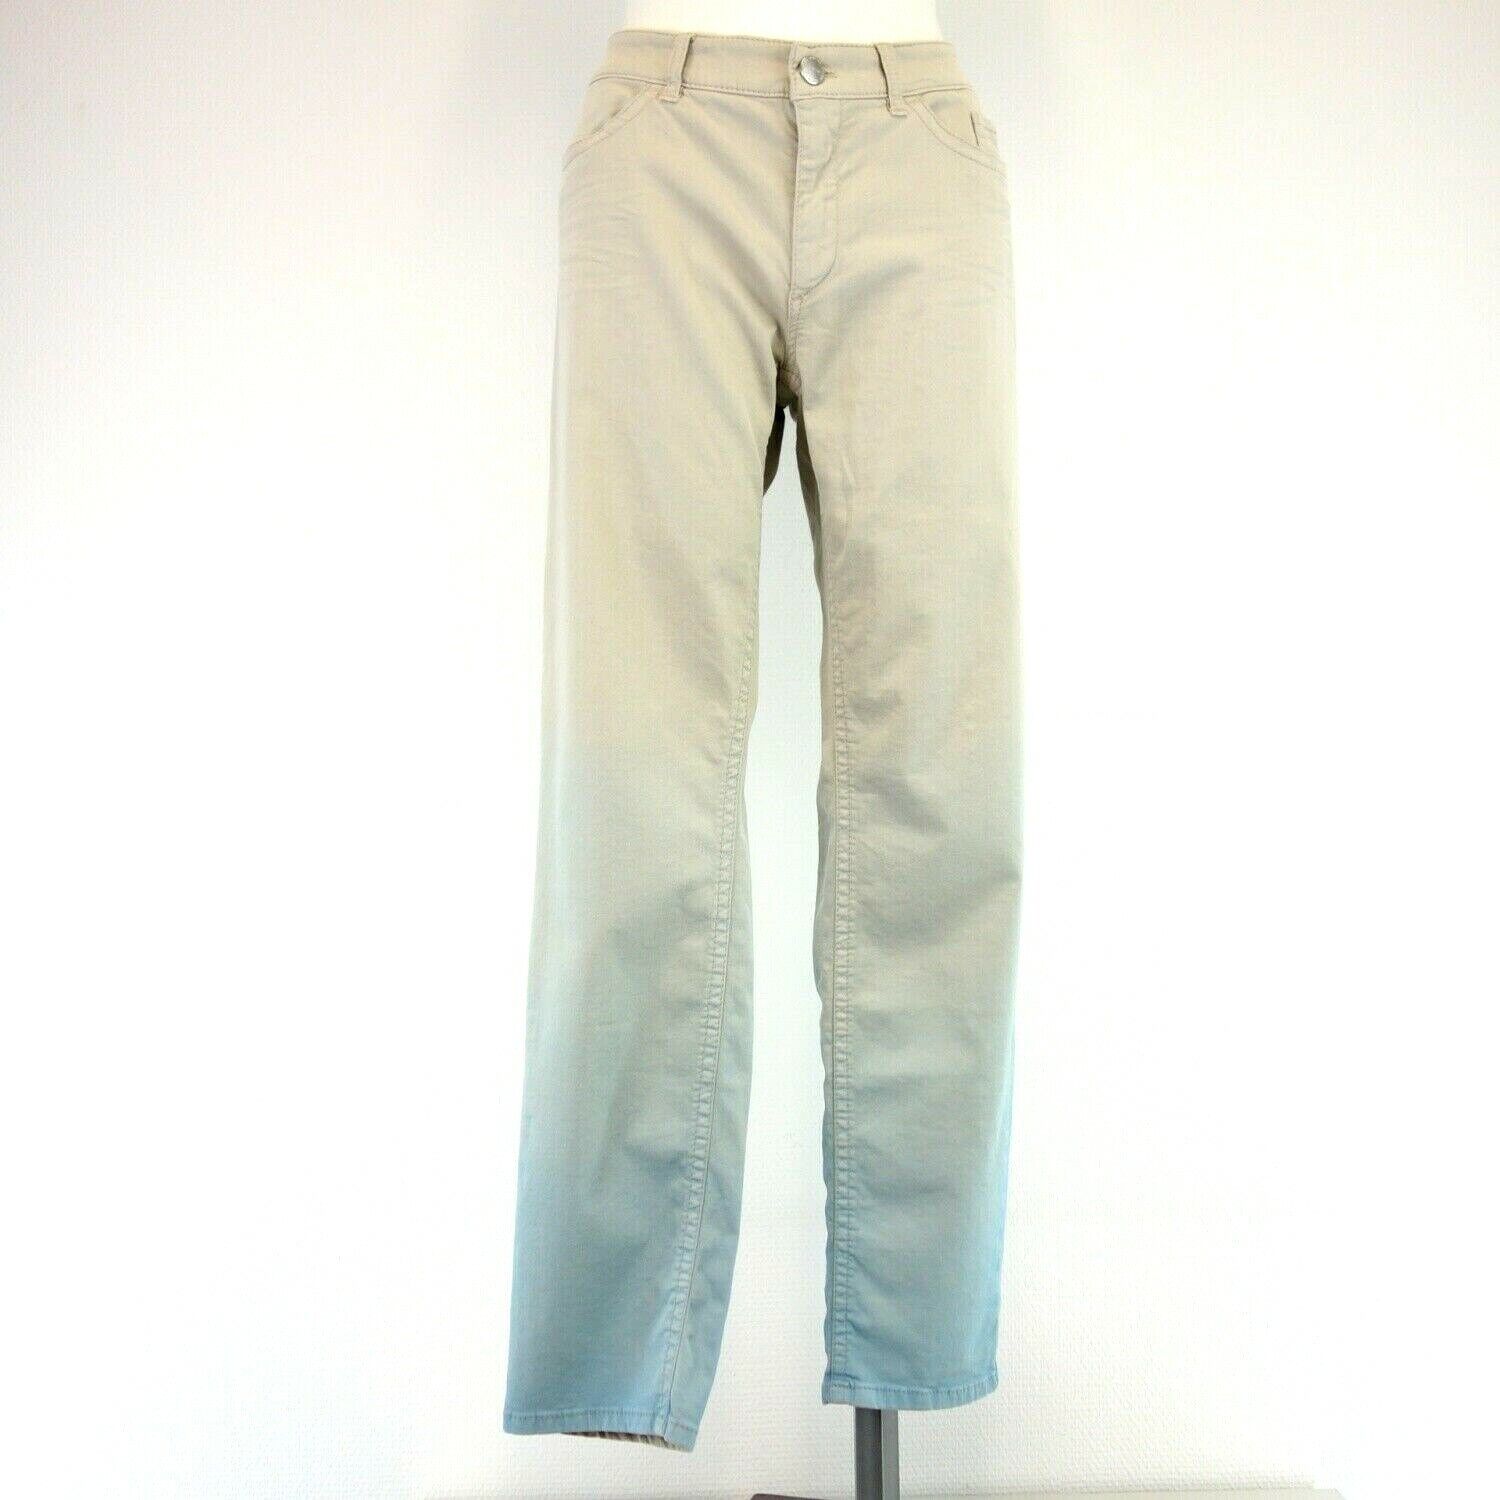 gone crazy access Exist Marc Cain Ladies Jeans Trousers Women&#039;s Trousers Beige Ombre Skinny N5  42 New | eBay